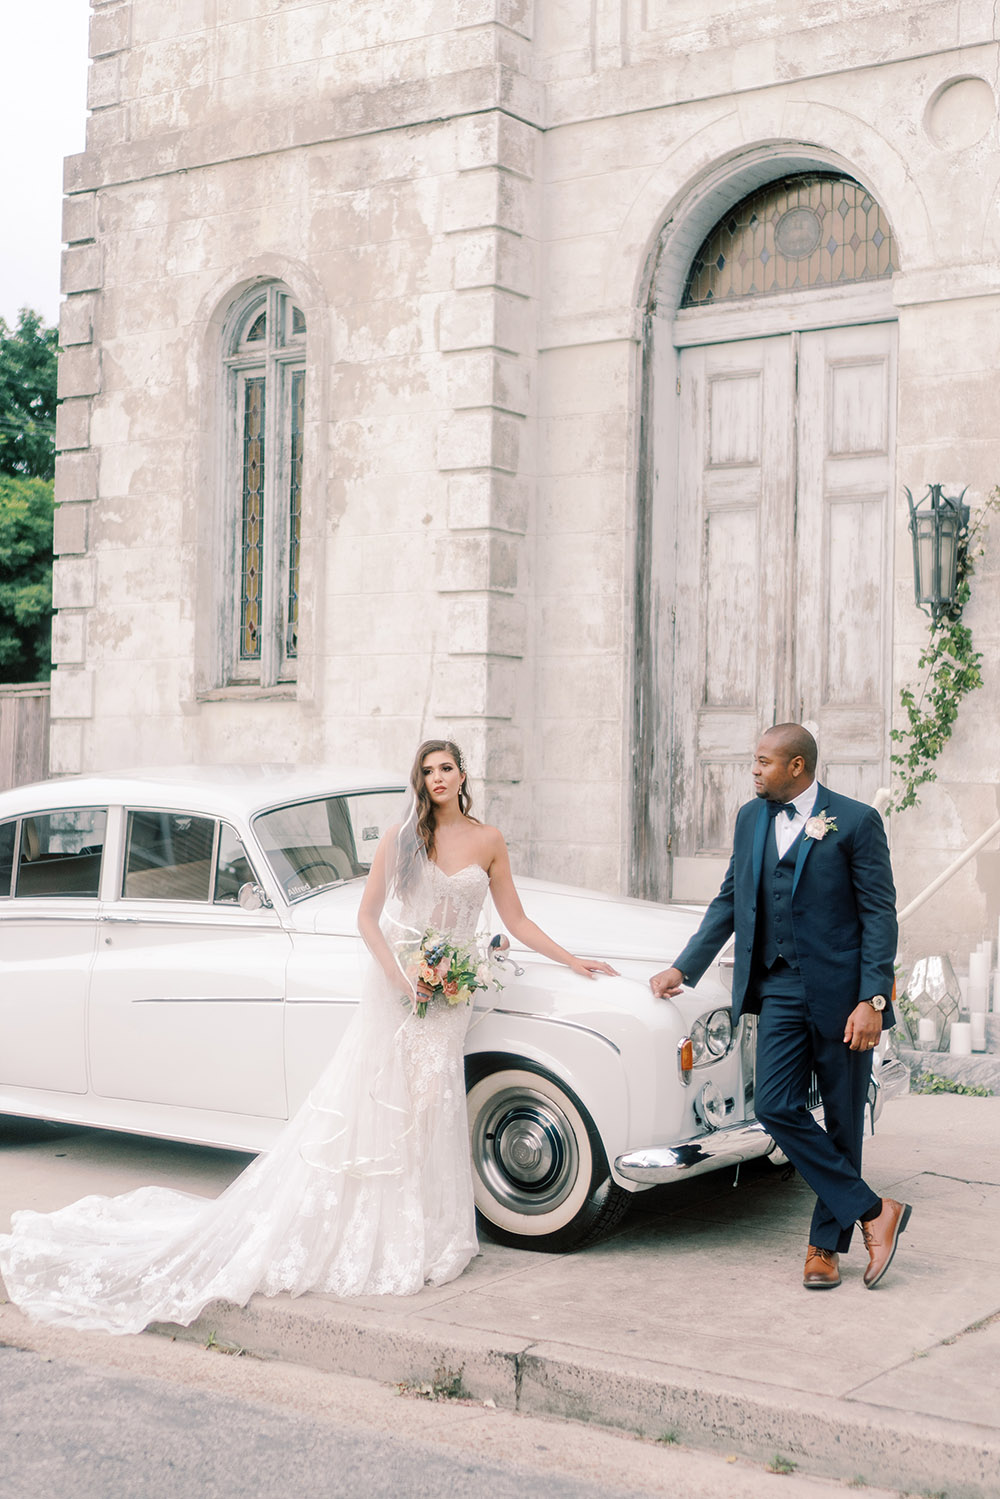 Bride and groom with antique Rolls Royce